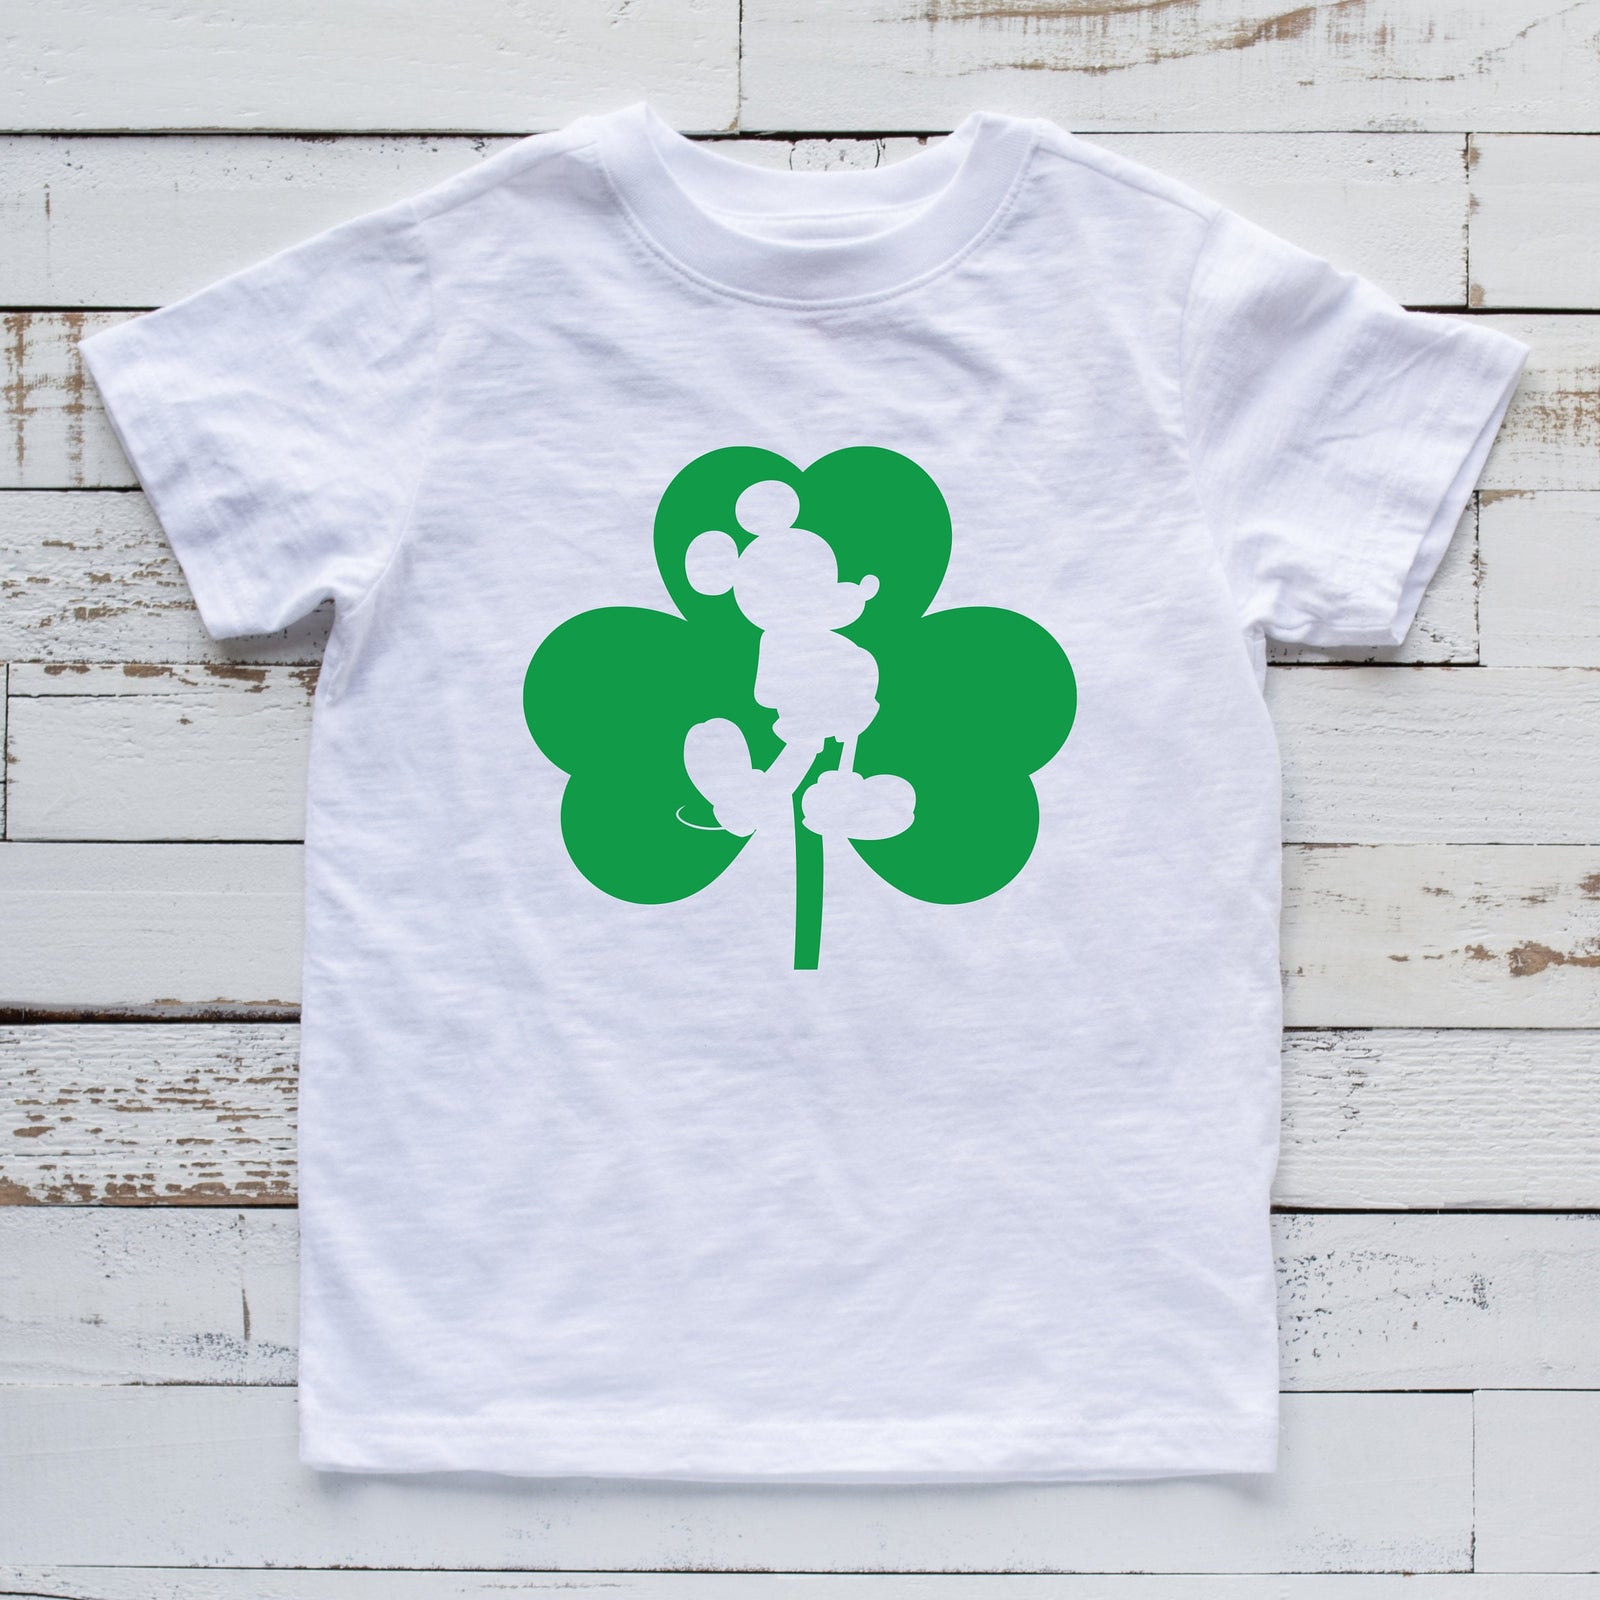 Mickey Mouse Youth Kids T Shirt - Disney St. Patrick's Day - Shamrock - Luckiest Kid Ever - Silhouette - Family Matching Shirts